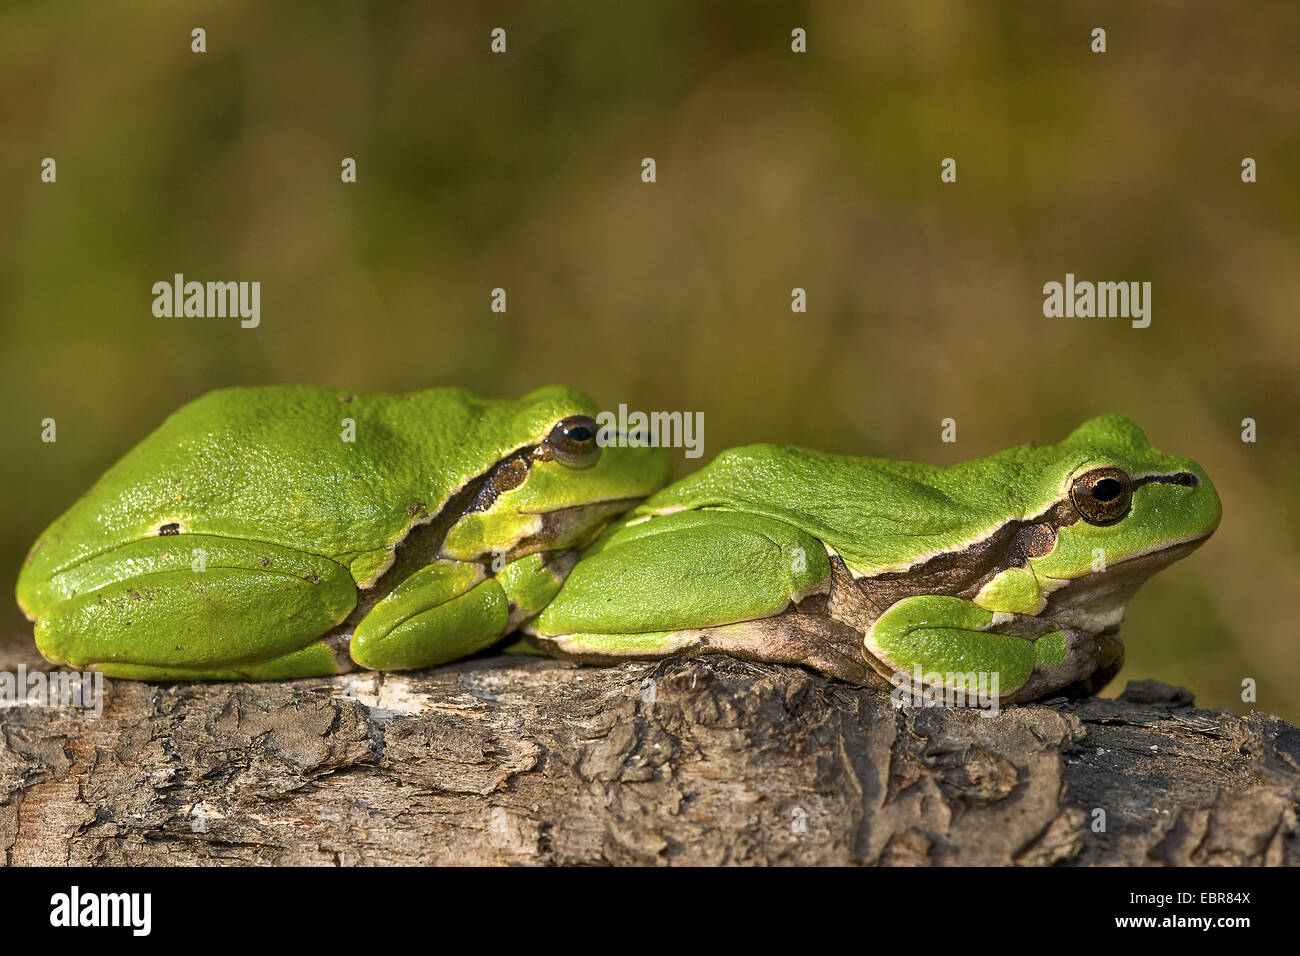 European treefrog, common treefrog, Central European treefrog (Hyla arborea), two treefrogs resting on a branch, Germany Stock Photo